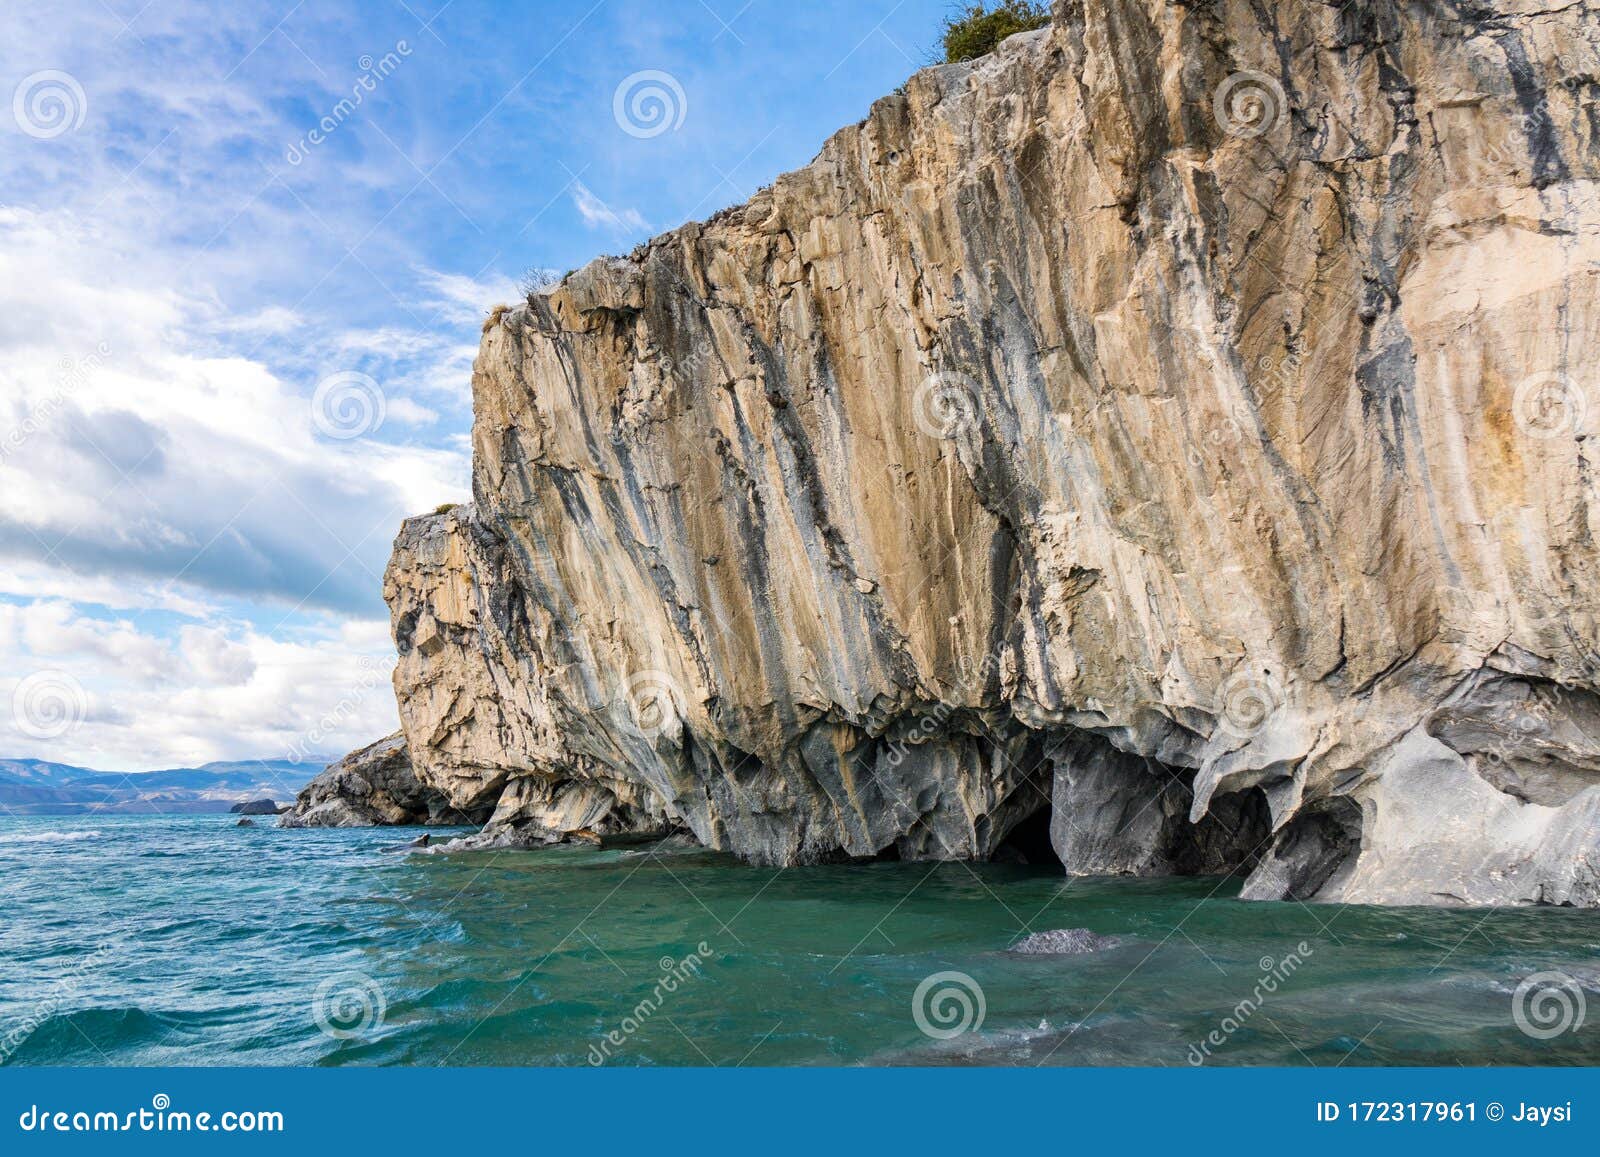 marble caves capillas del marmol, general carrera lake, landscape of lago buenos aires, patagonia, chile